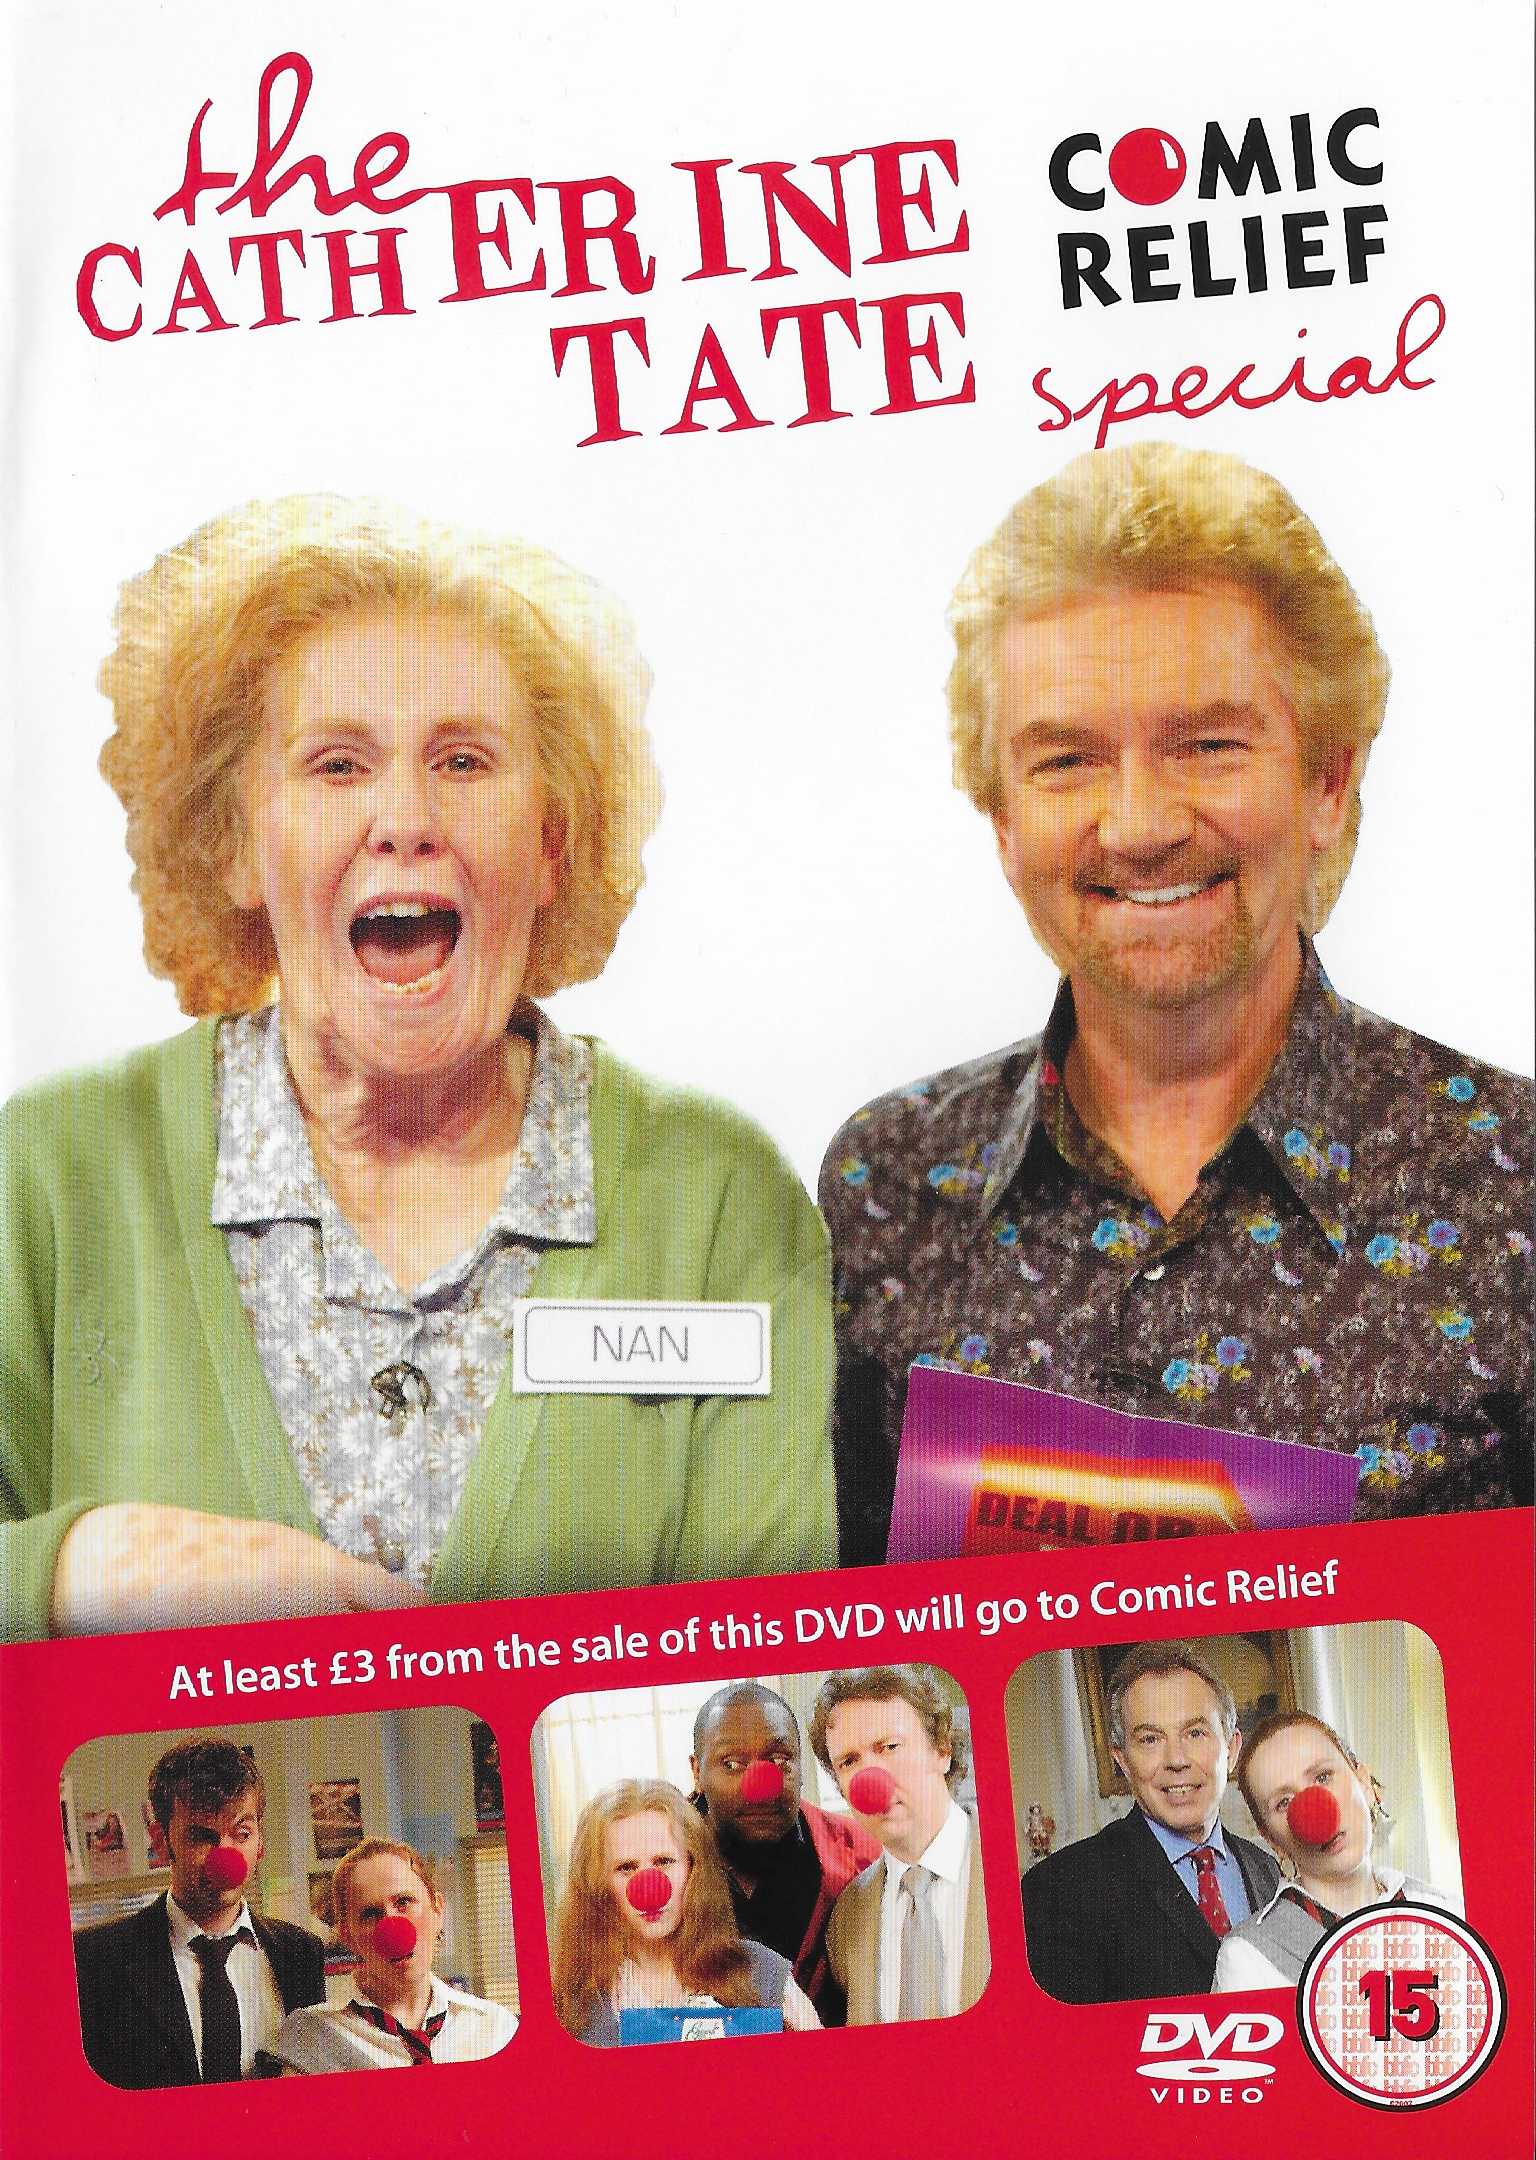 Picture of The Catherine Tate Comic Relief special by artist Catherine Tate from the BBC dvds - Records and Tapes library